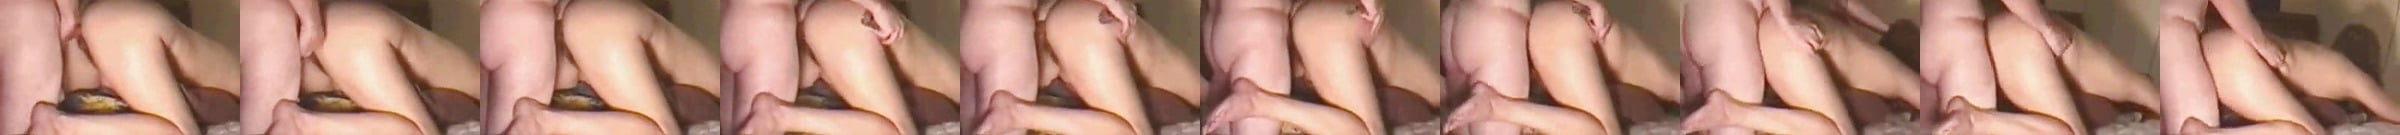 Mature First Anal Video Porno Xhamster